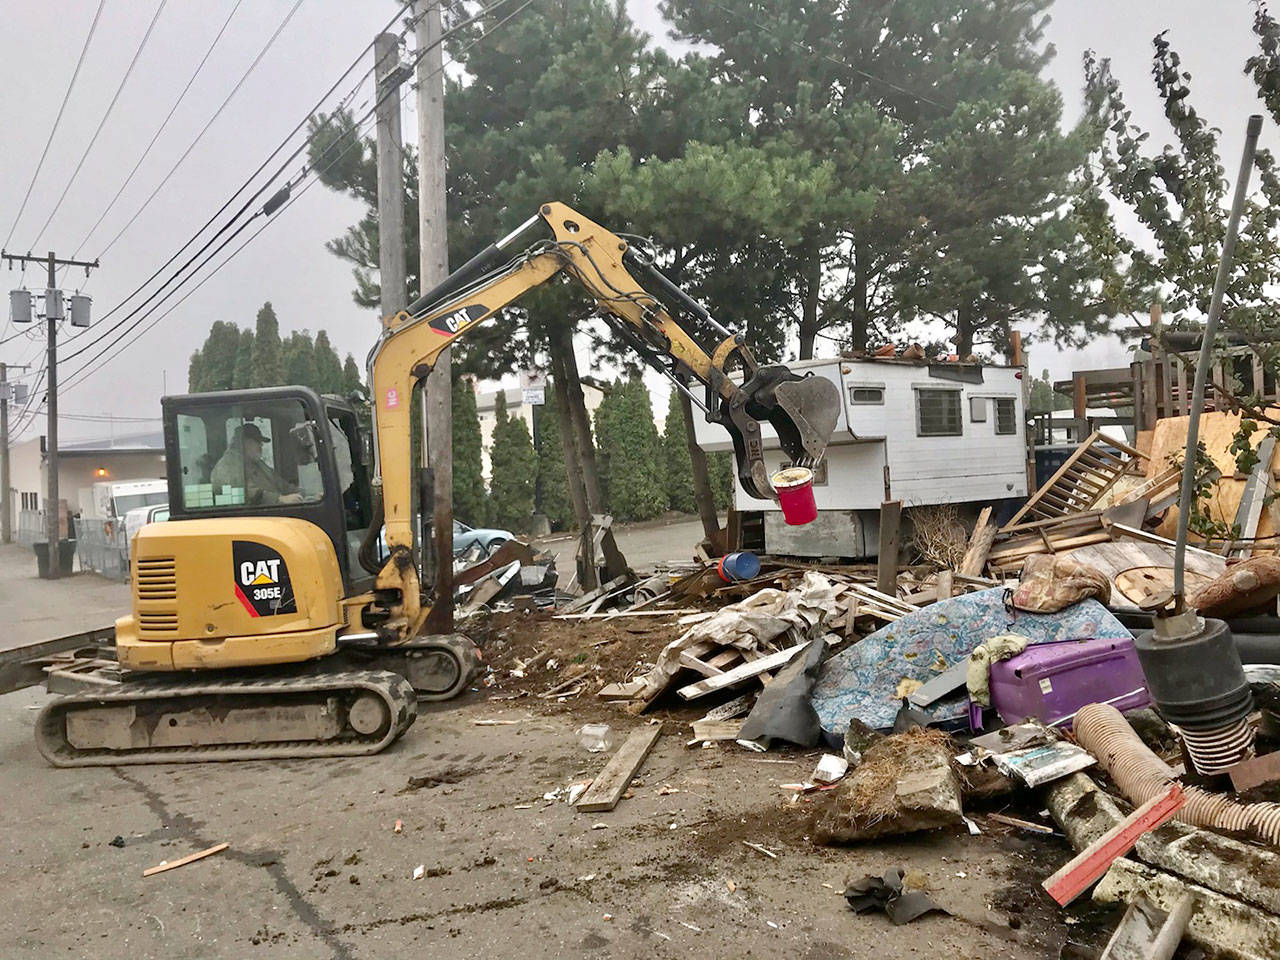 Jim Bishop operates an excavator Monday, Nov. 2, 2020, on property being cleaned up on orders from Port Angeles city officials. The property is owned by former Judge Brian Coughenour. (Paul Gottlieb/Peninsula Daily News)